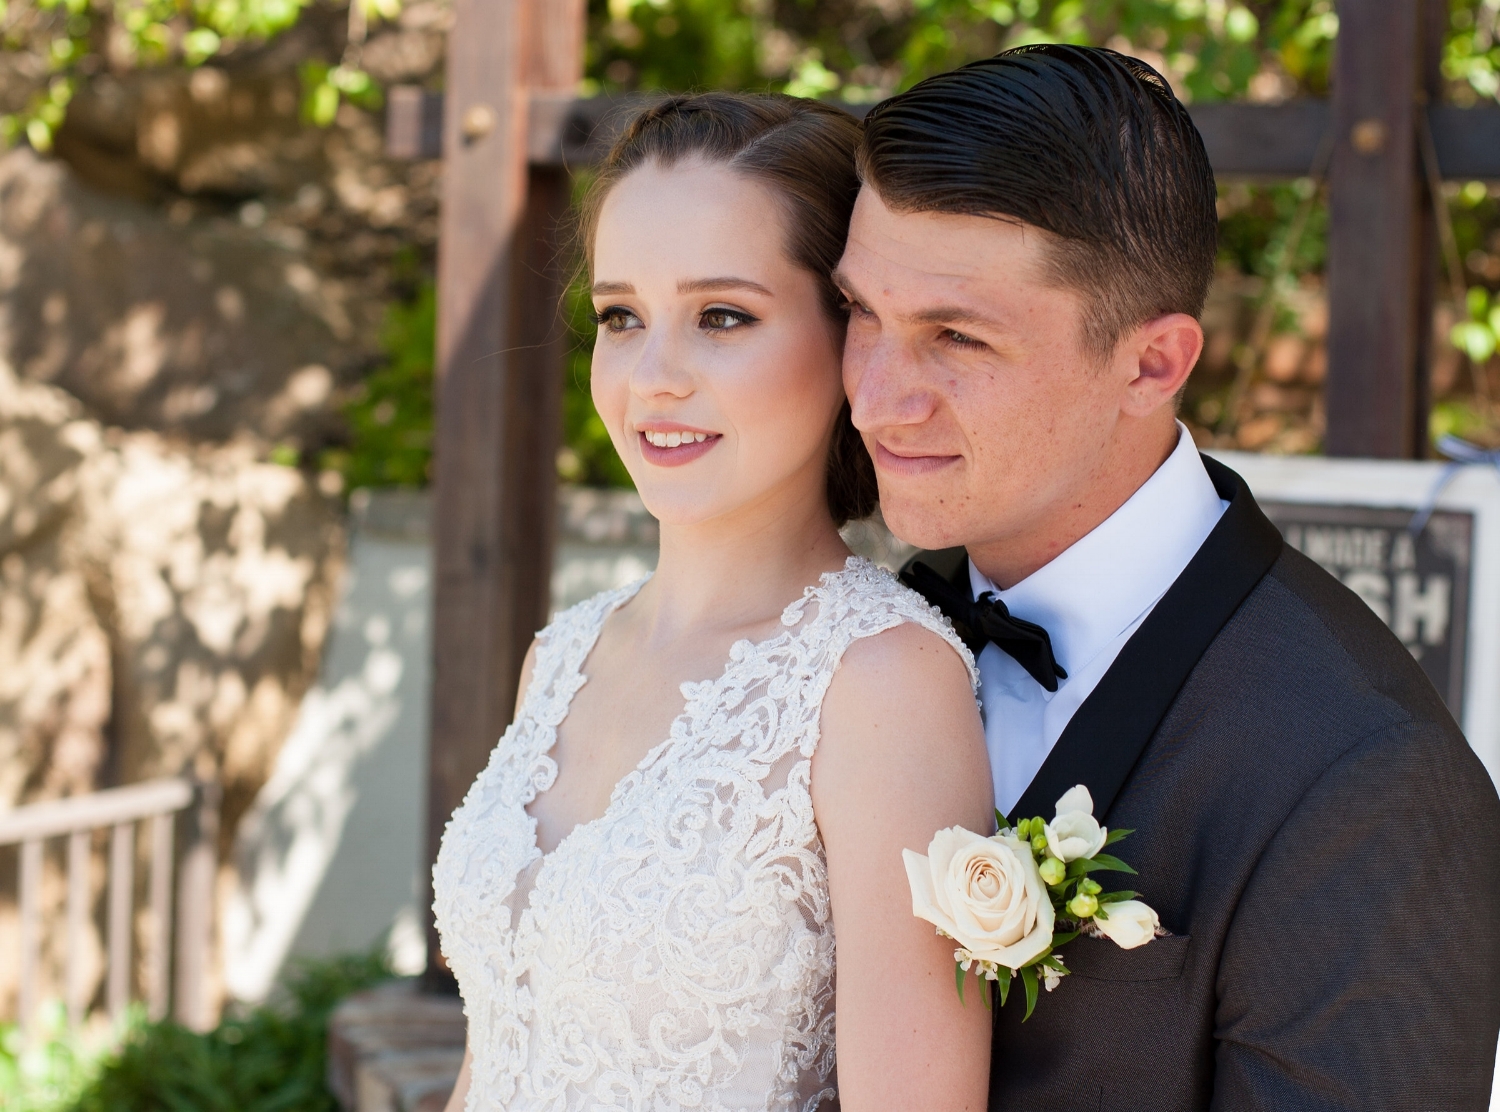 Wedding Day Photos of Young Brunette Bride with Natural Makeup and Braided Updo. Bridal Hair and Beauty by Vanity Belle in Orange County (Costa Mesa) and San Diego (La Jolla)